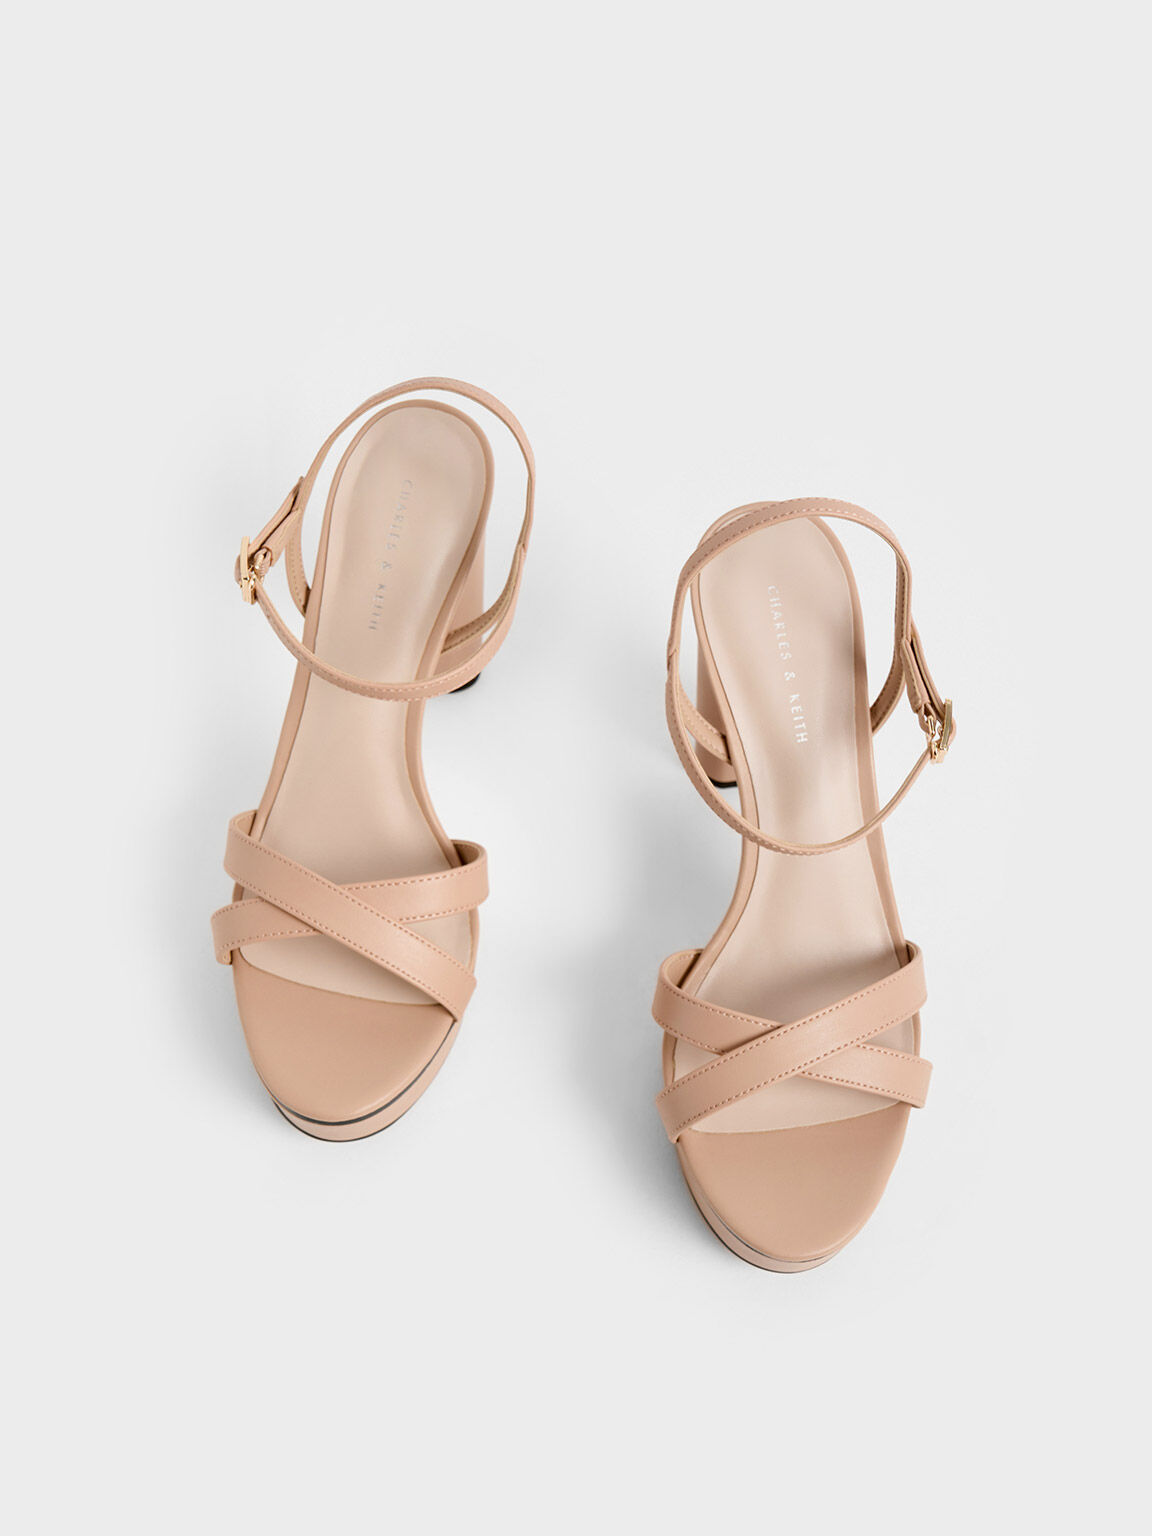 Women's Shoes | Shop Exclusive Styles | CHARLES & KEITH IN